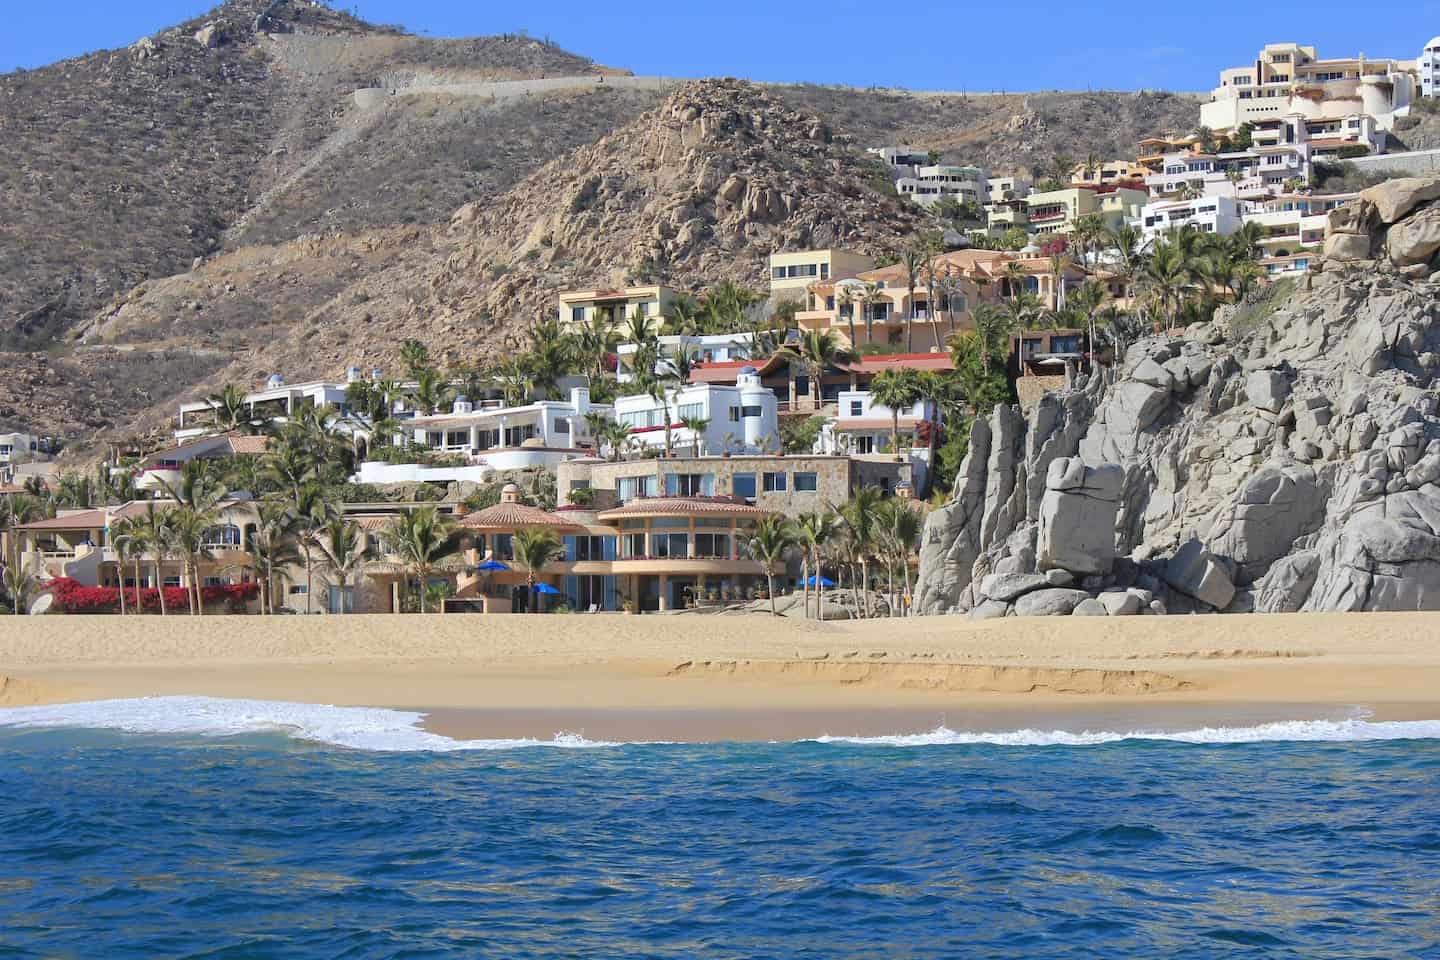 Image of Airbnb rental in Cabo San Lucas, Mexico